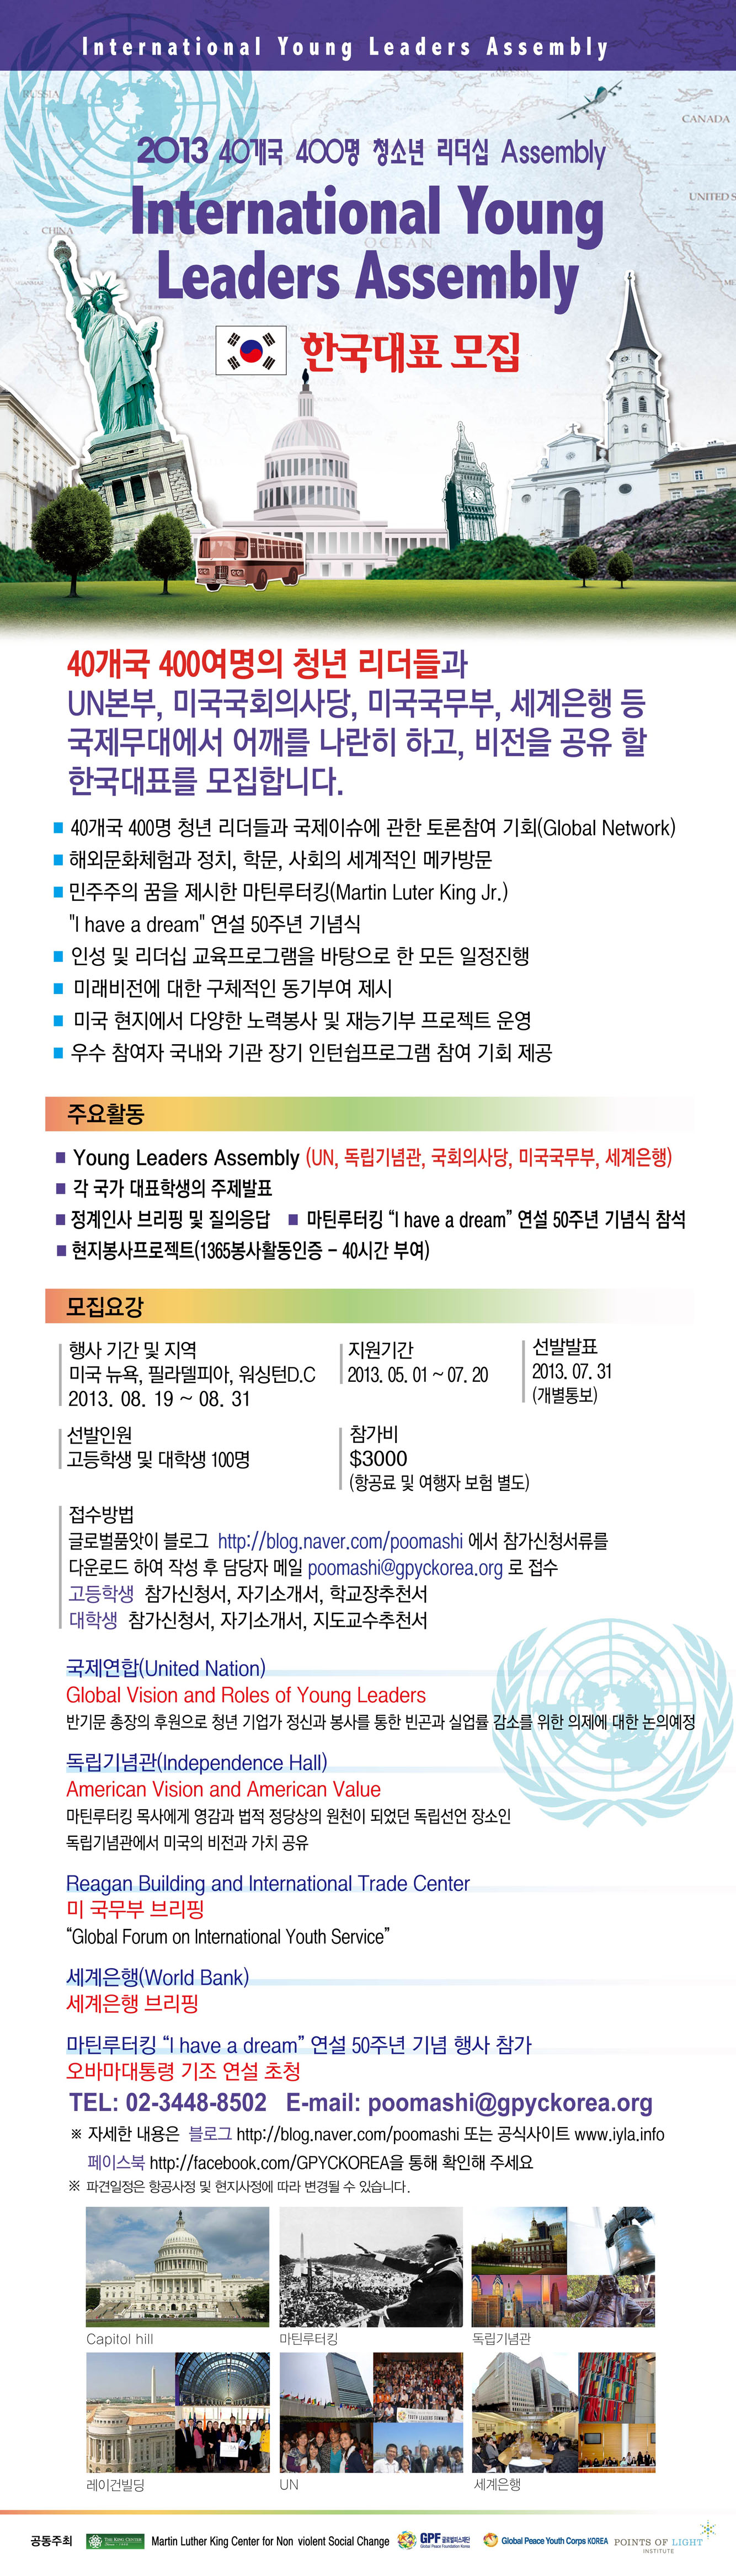 poster(International Young Leaders Assembly)